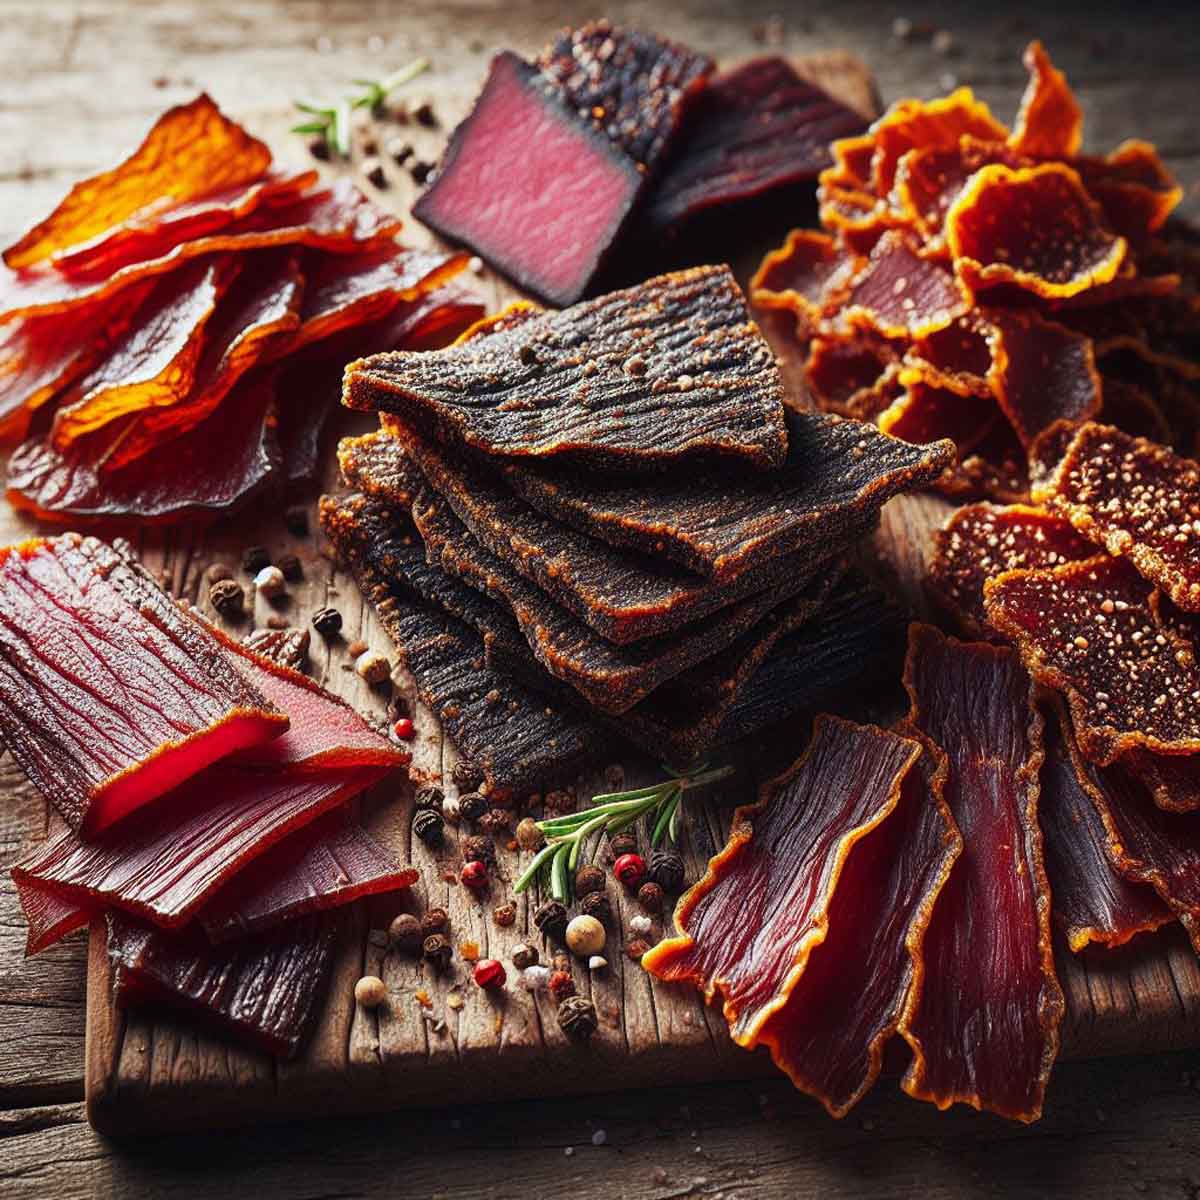 A vibrant display of different beef jerky types, each with unique textures and colors.